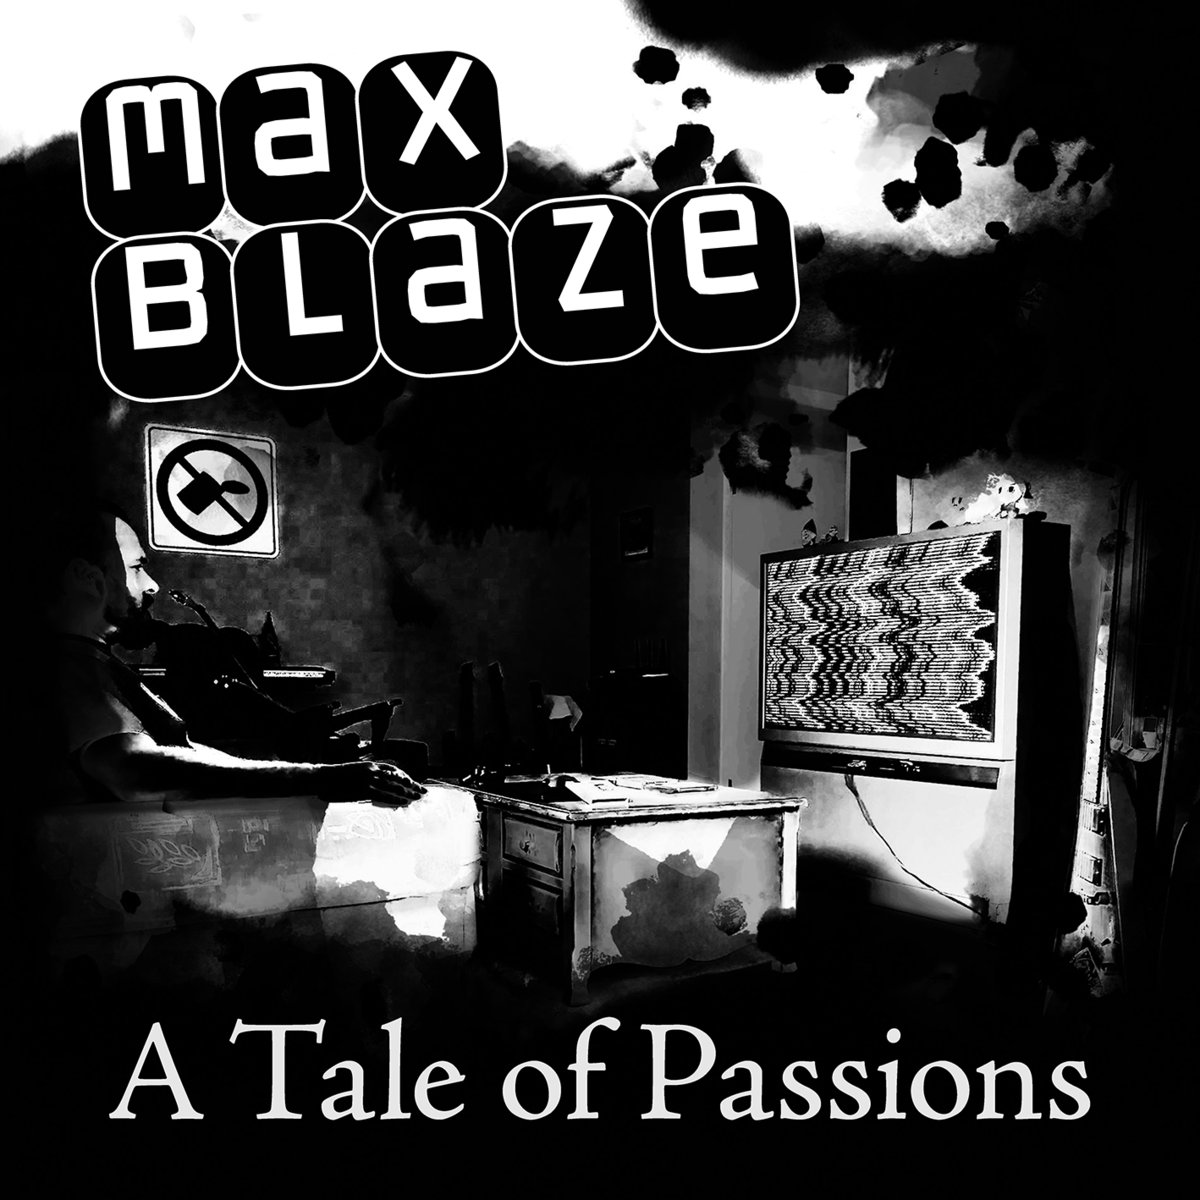 Max Blaze 2018 - A Tale of Passions